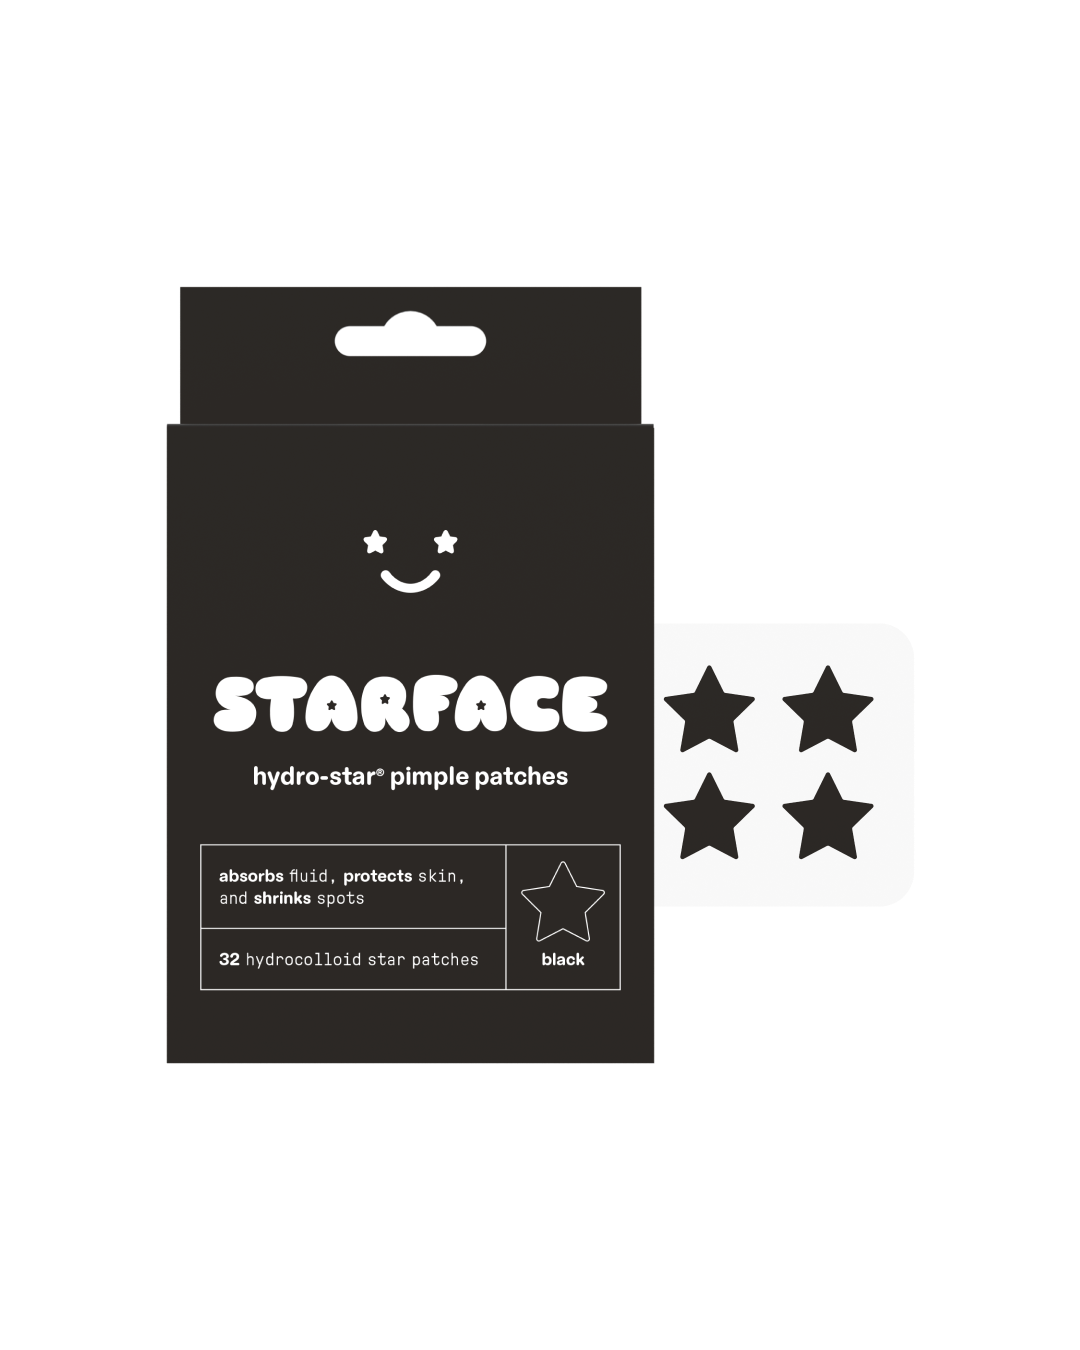 Black Star box reads "Starface, Hydro-Star® pimple patches, absorbs fluid, protects skin, and shrinks spots, 32 hydrocolloid star patches, black." 